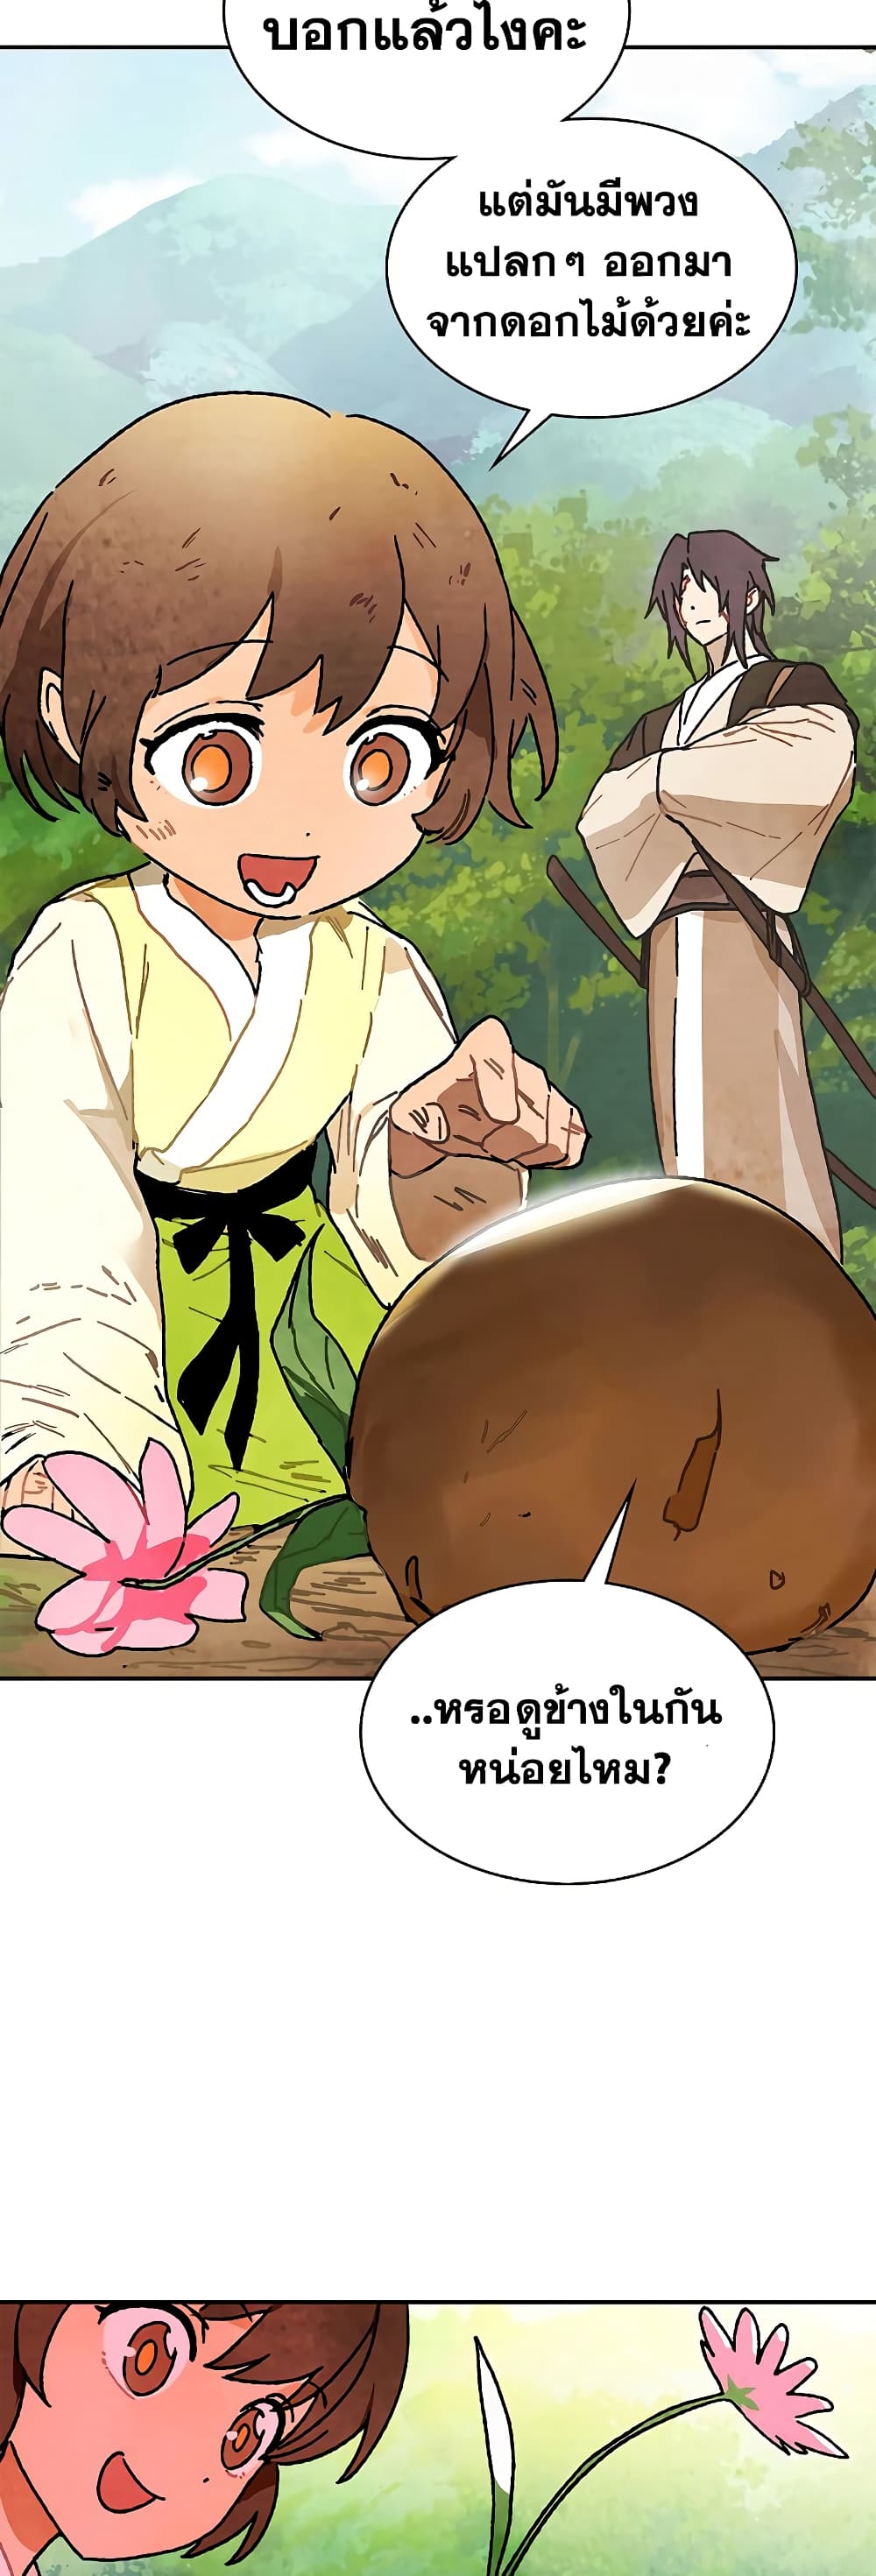 Chronicles Of The Martial God’s Return ตอนที่ 7 (17)